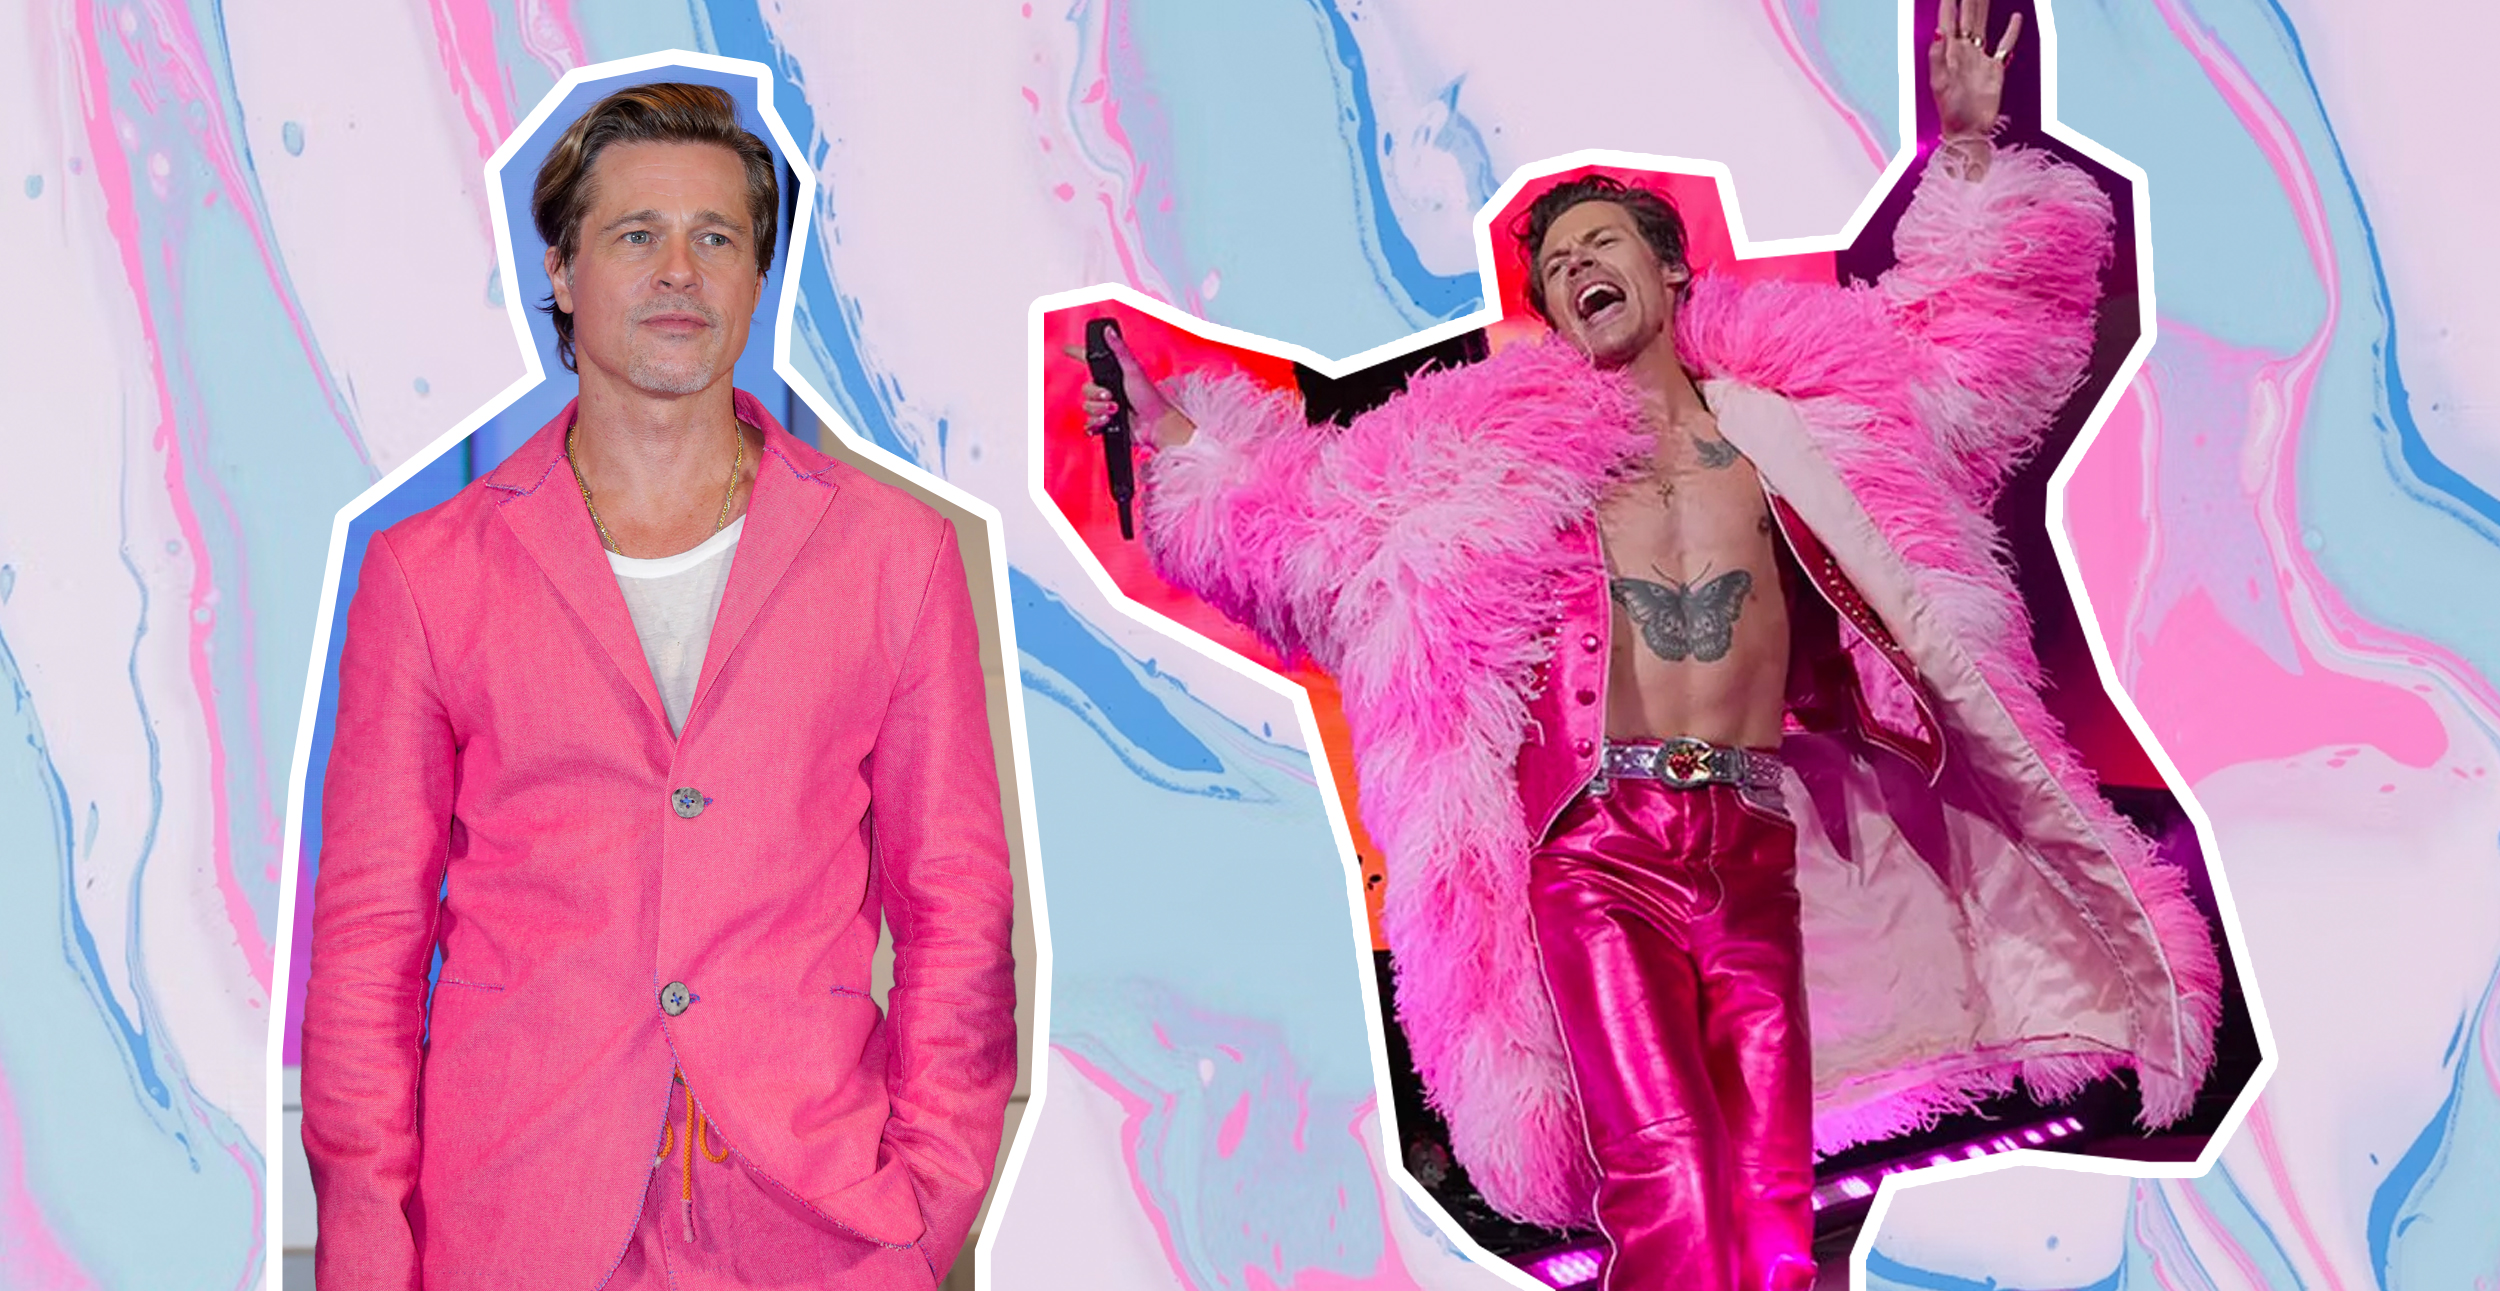 Harry Styles went viral with a pink Gucci eco-fur at Coachella 2022, while Brad Pitt showed up in total pink two-piece suit at the première of Bullet Train in Korea